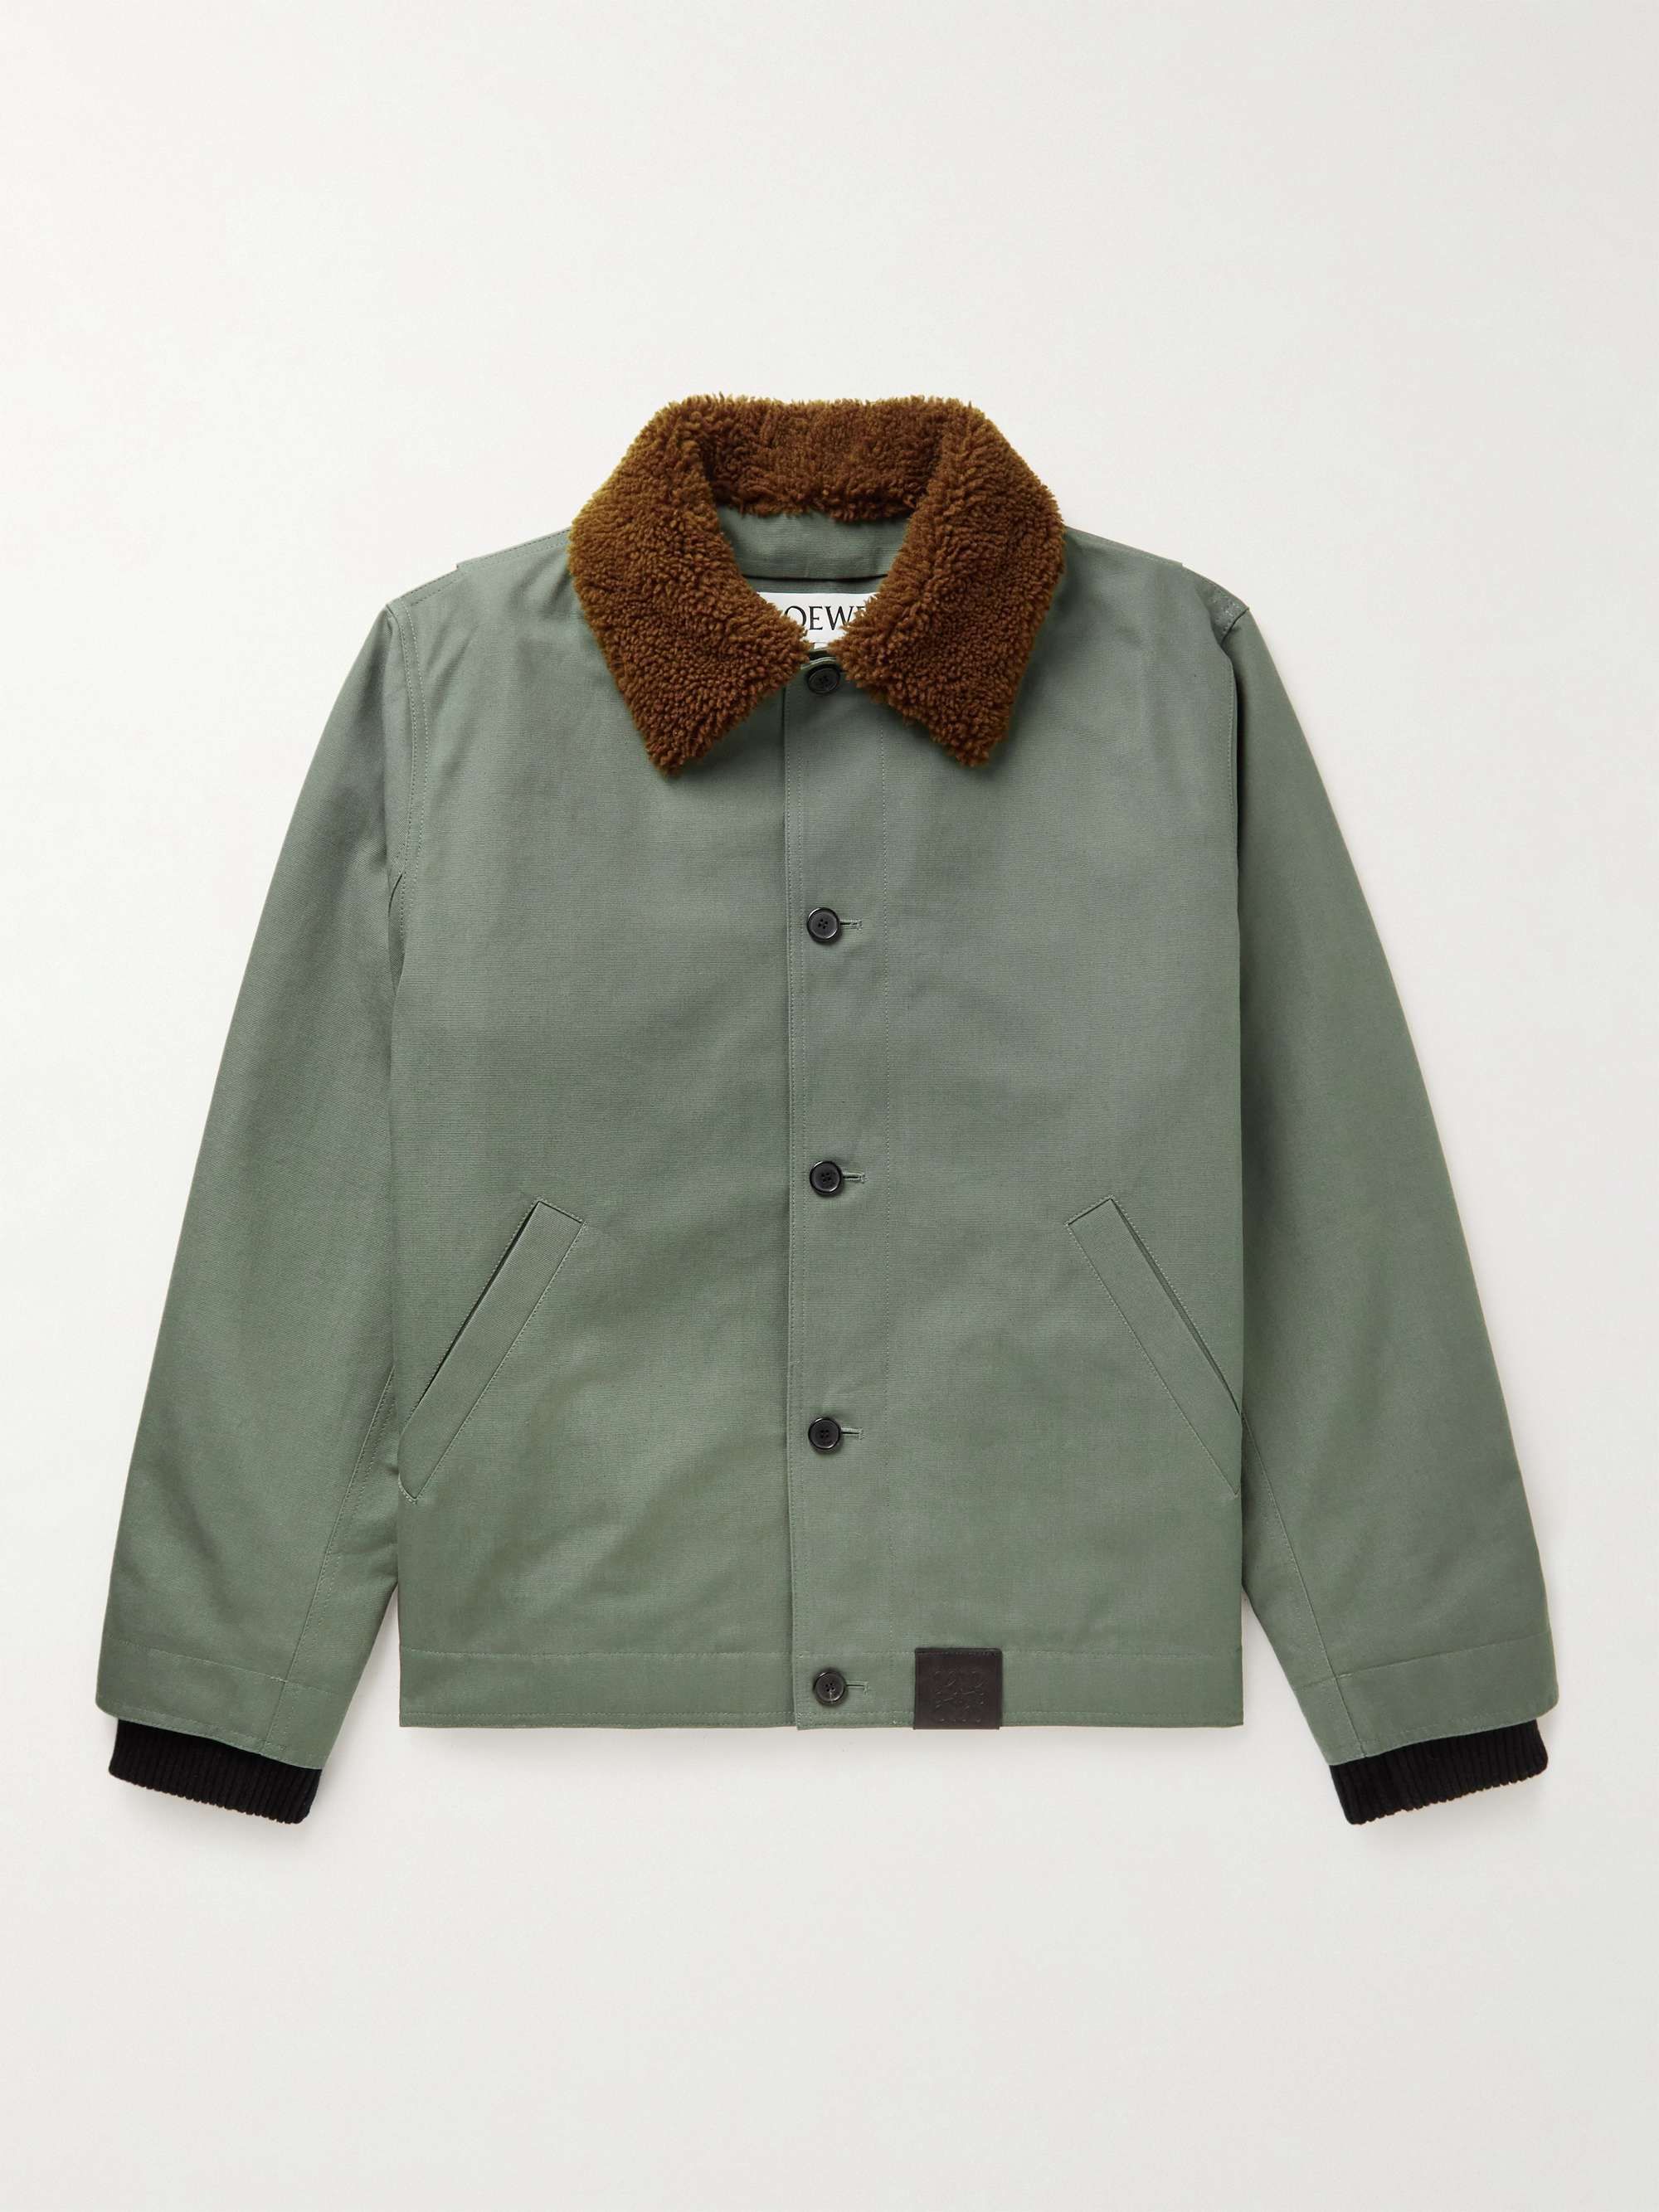 LOEWE Shearling-Trimmed Cotton-Canvas Jacket